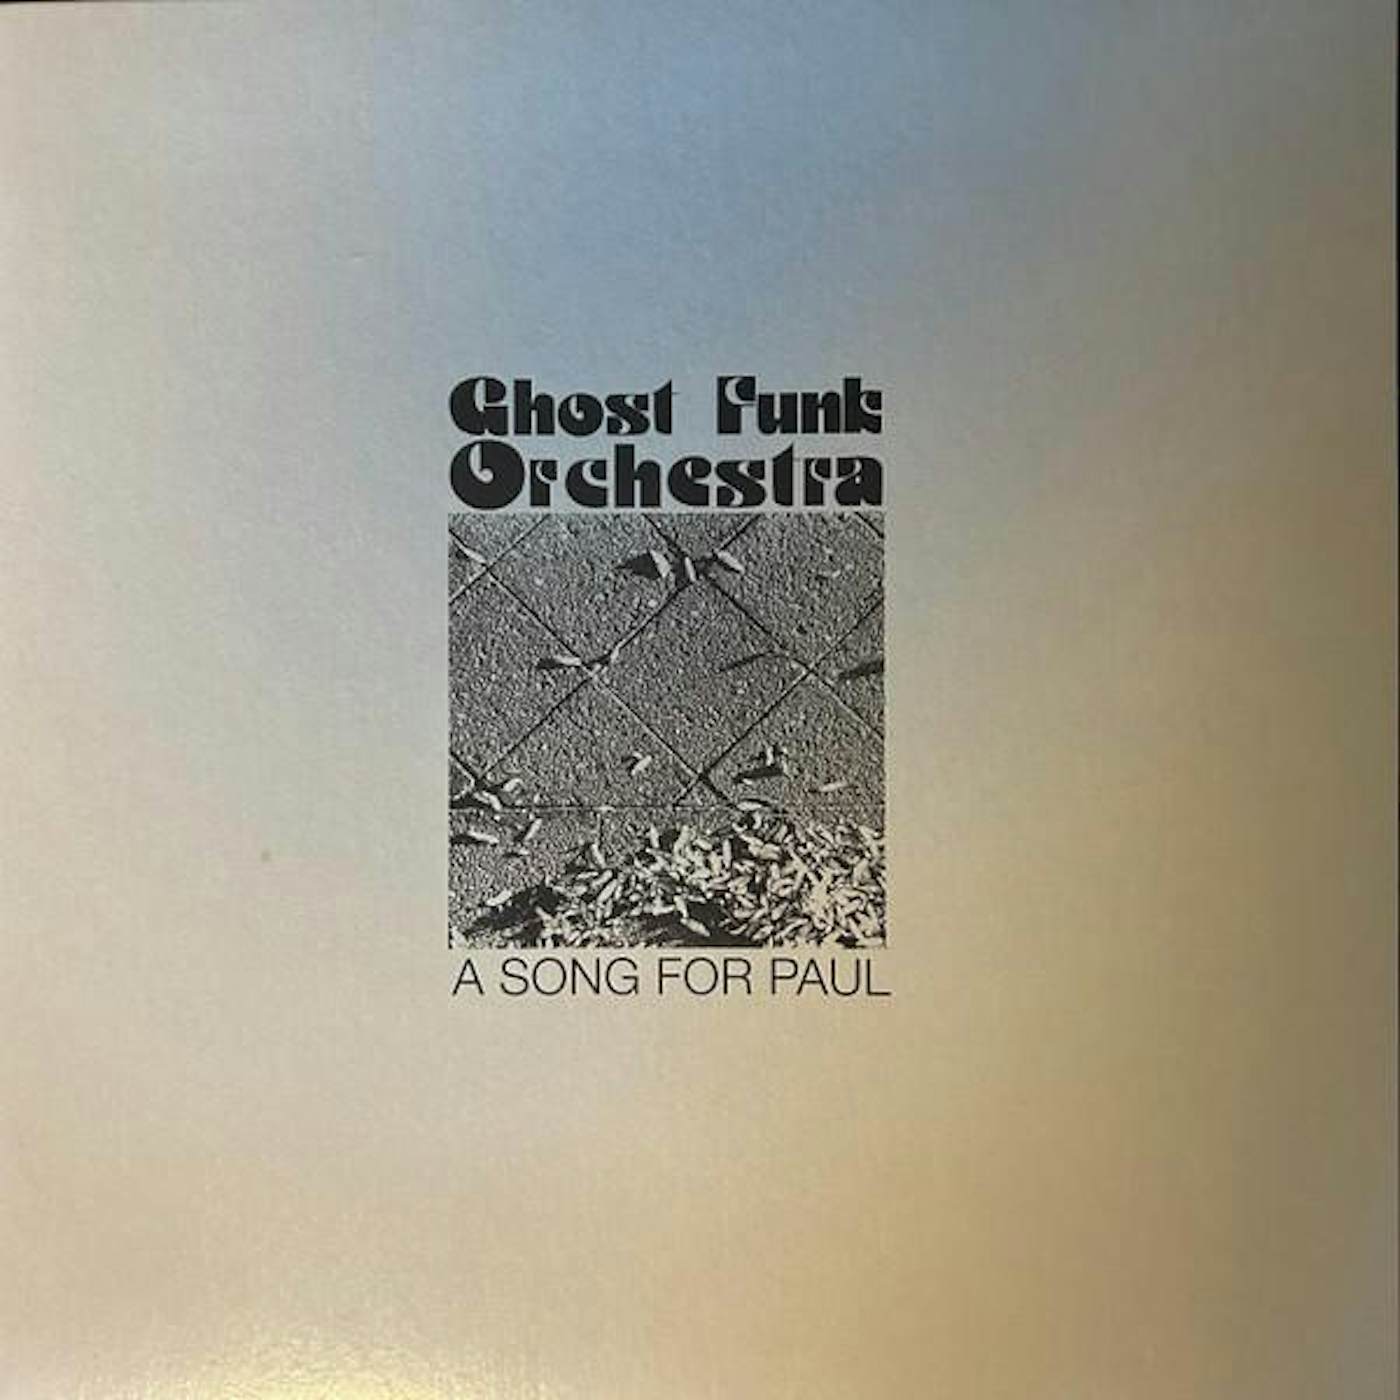 Ghost Funk Orchestra SONG FOR PAUL Vinyl Record